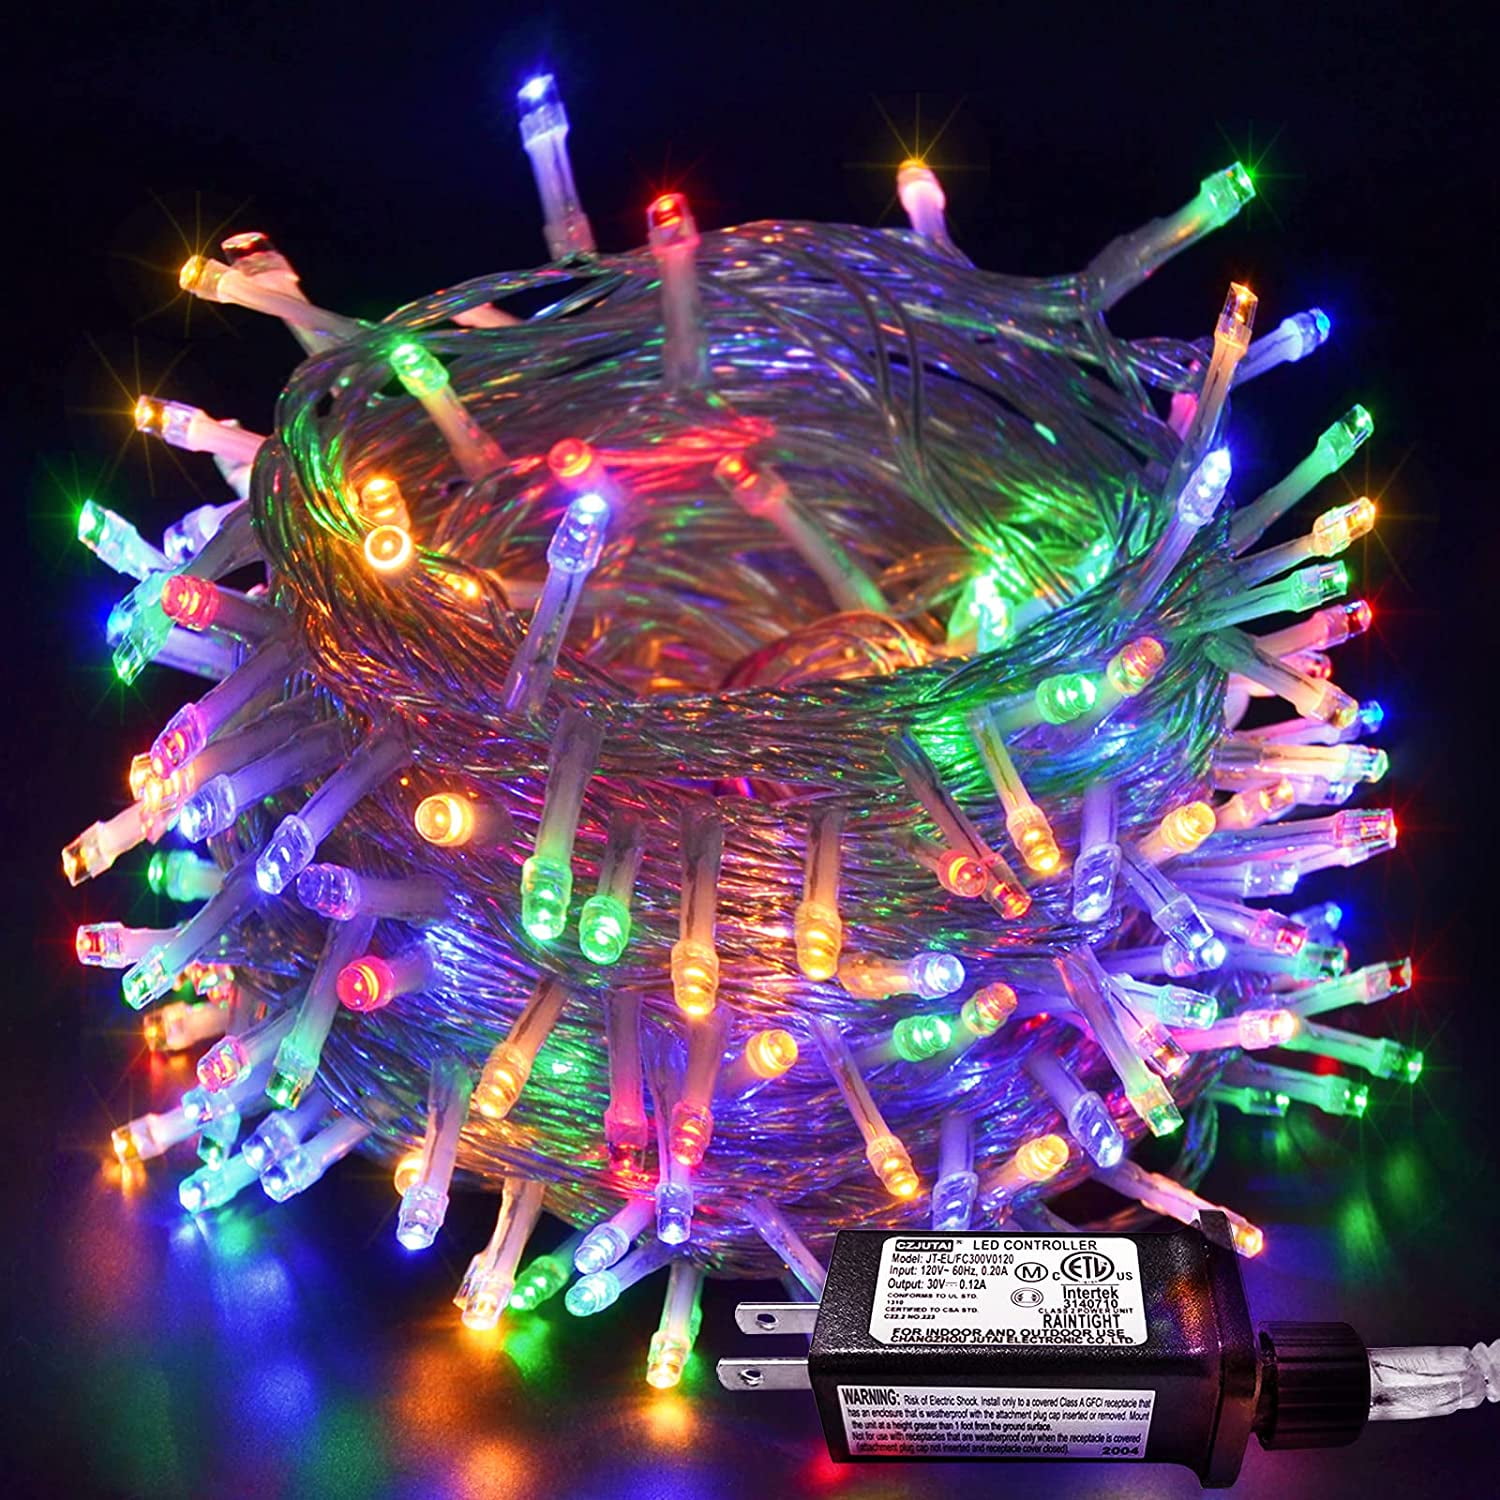 Details about   USB Twinkle LED String Fairy Lights Copper Wire Party Remote 5-20M 50/100/200LED 